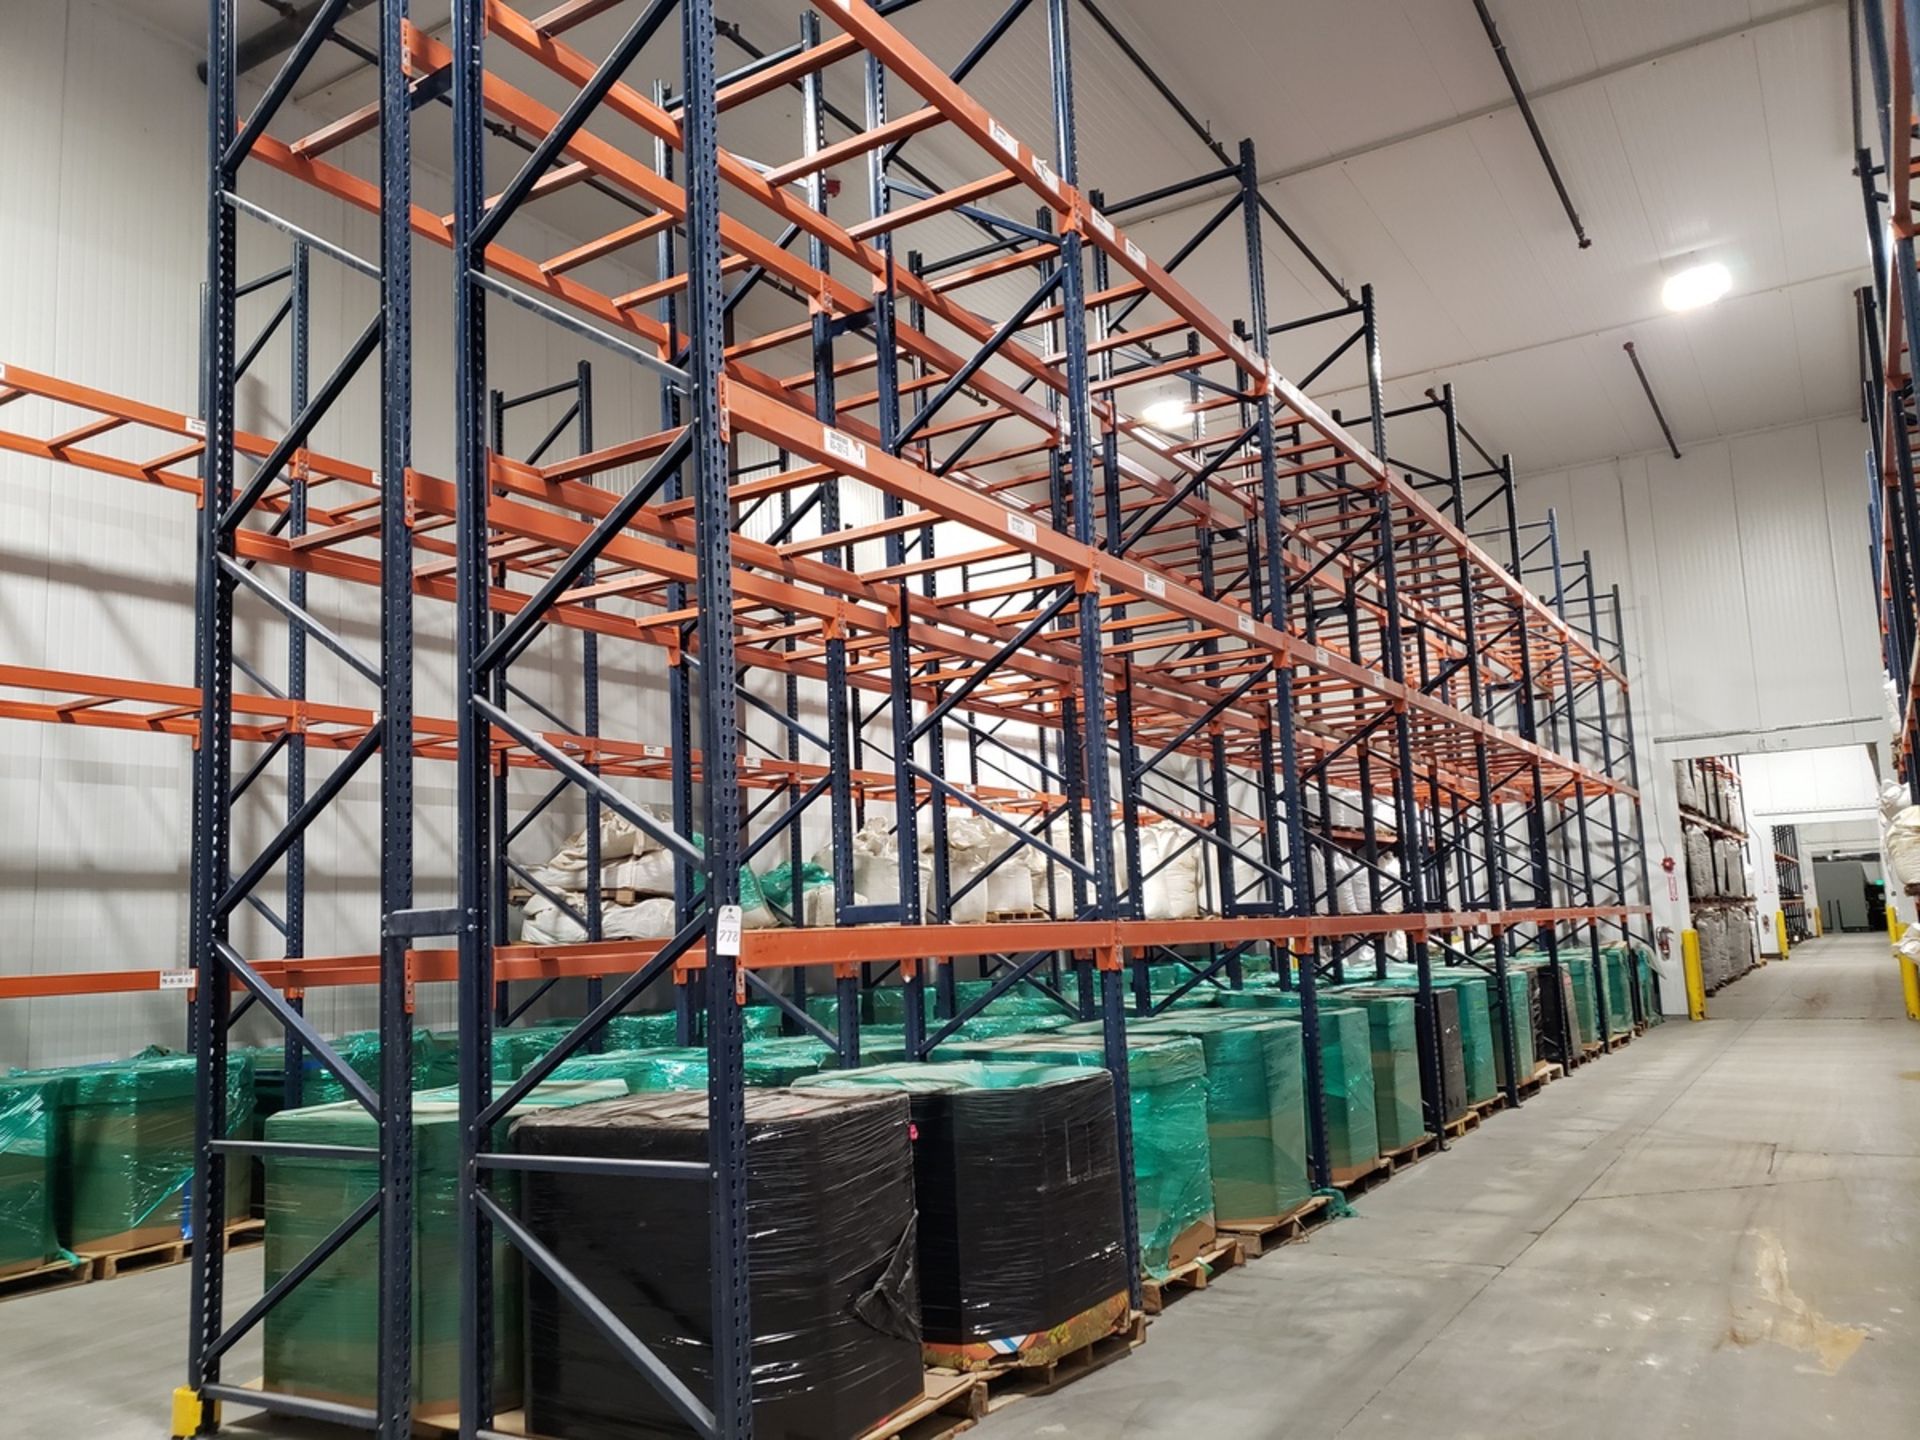 Lot of Pallet Racking, (18) Uprights, 42" x 20', (96) 8' Beams | Rig Fee $1800